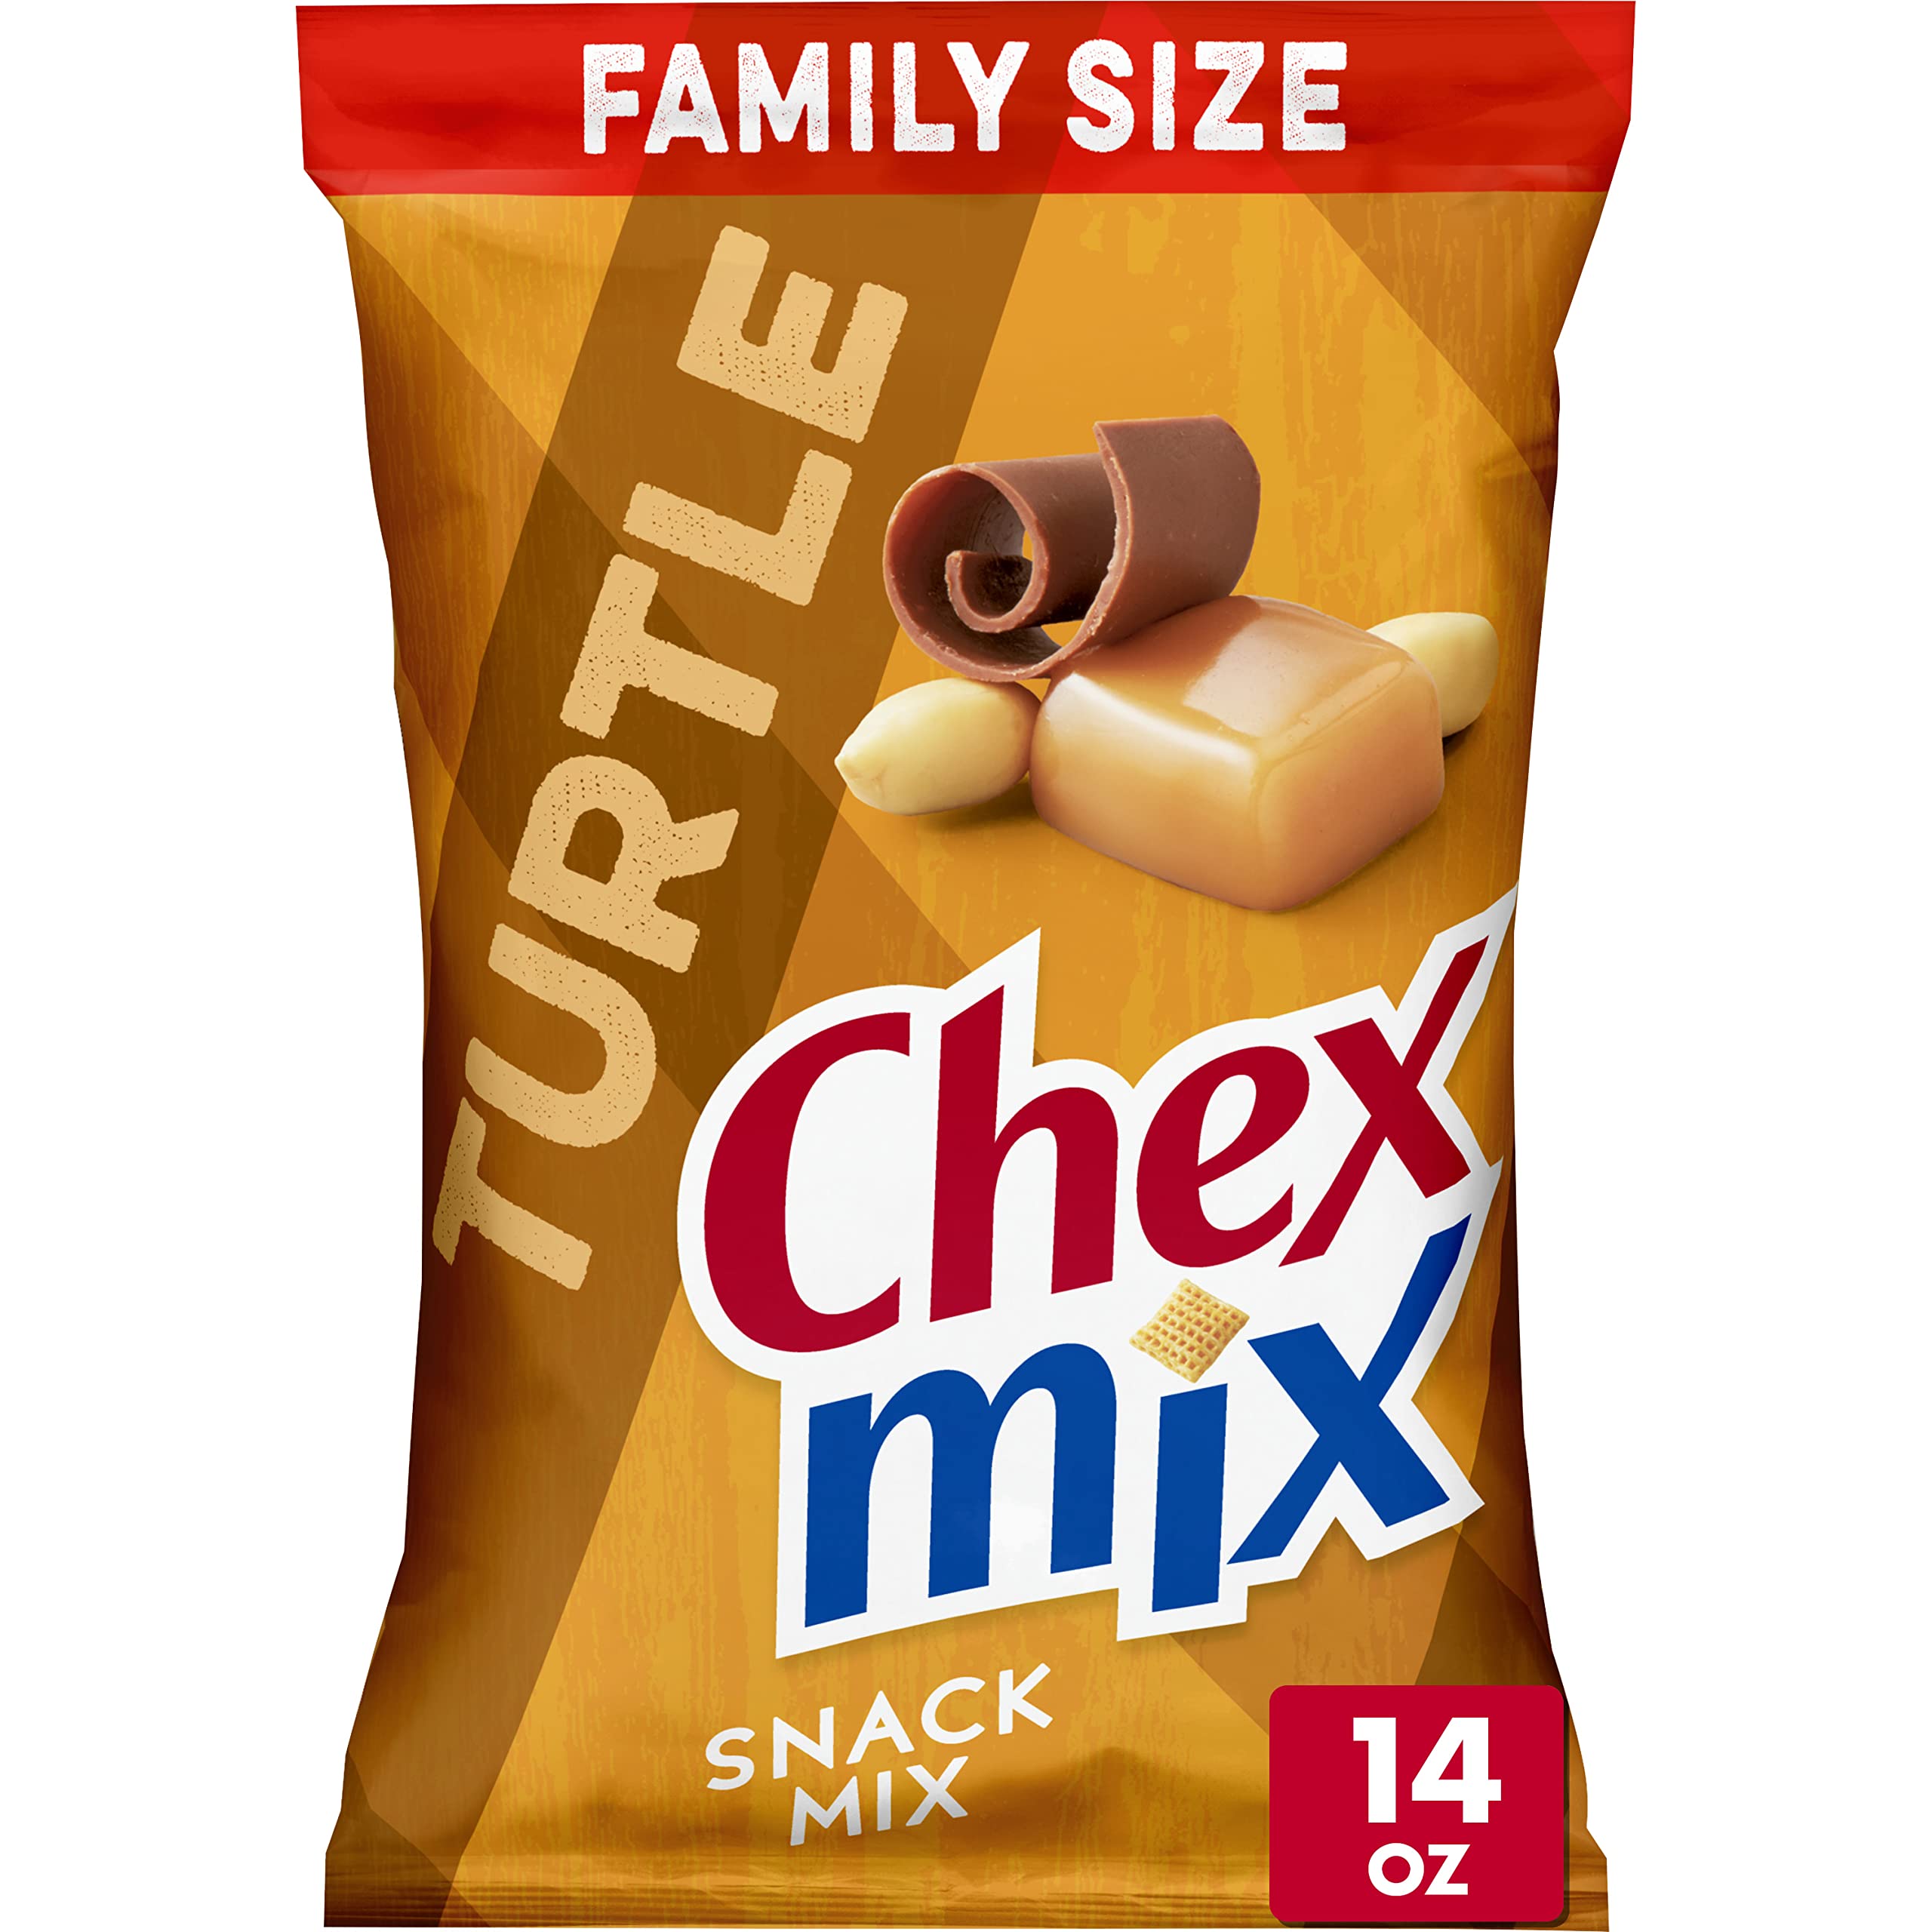 Chex Mix Snack Party Mix, Turtle, Indulgent Sweet Pub Mix Snack Bag, 14 oz, $2.97 with S&S and 20% coupon